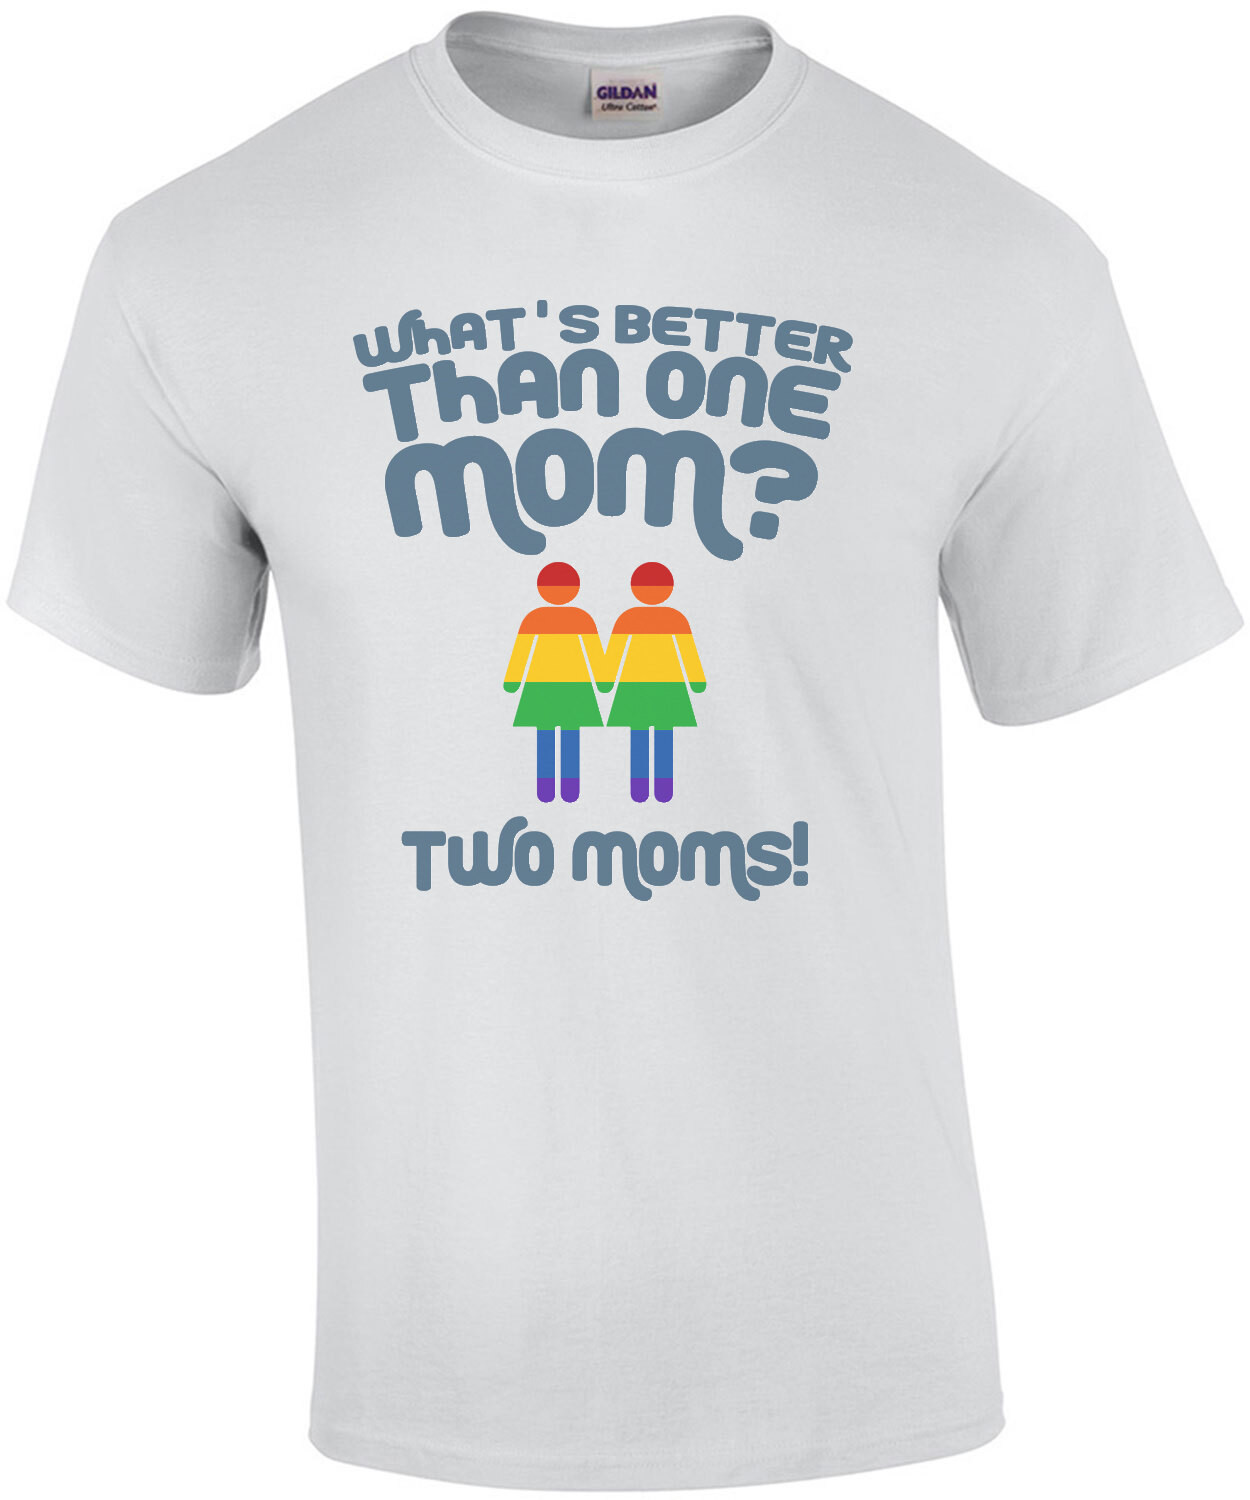 Whats better than one mom? Two moms - gay pride t-shirt